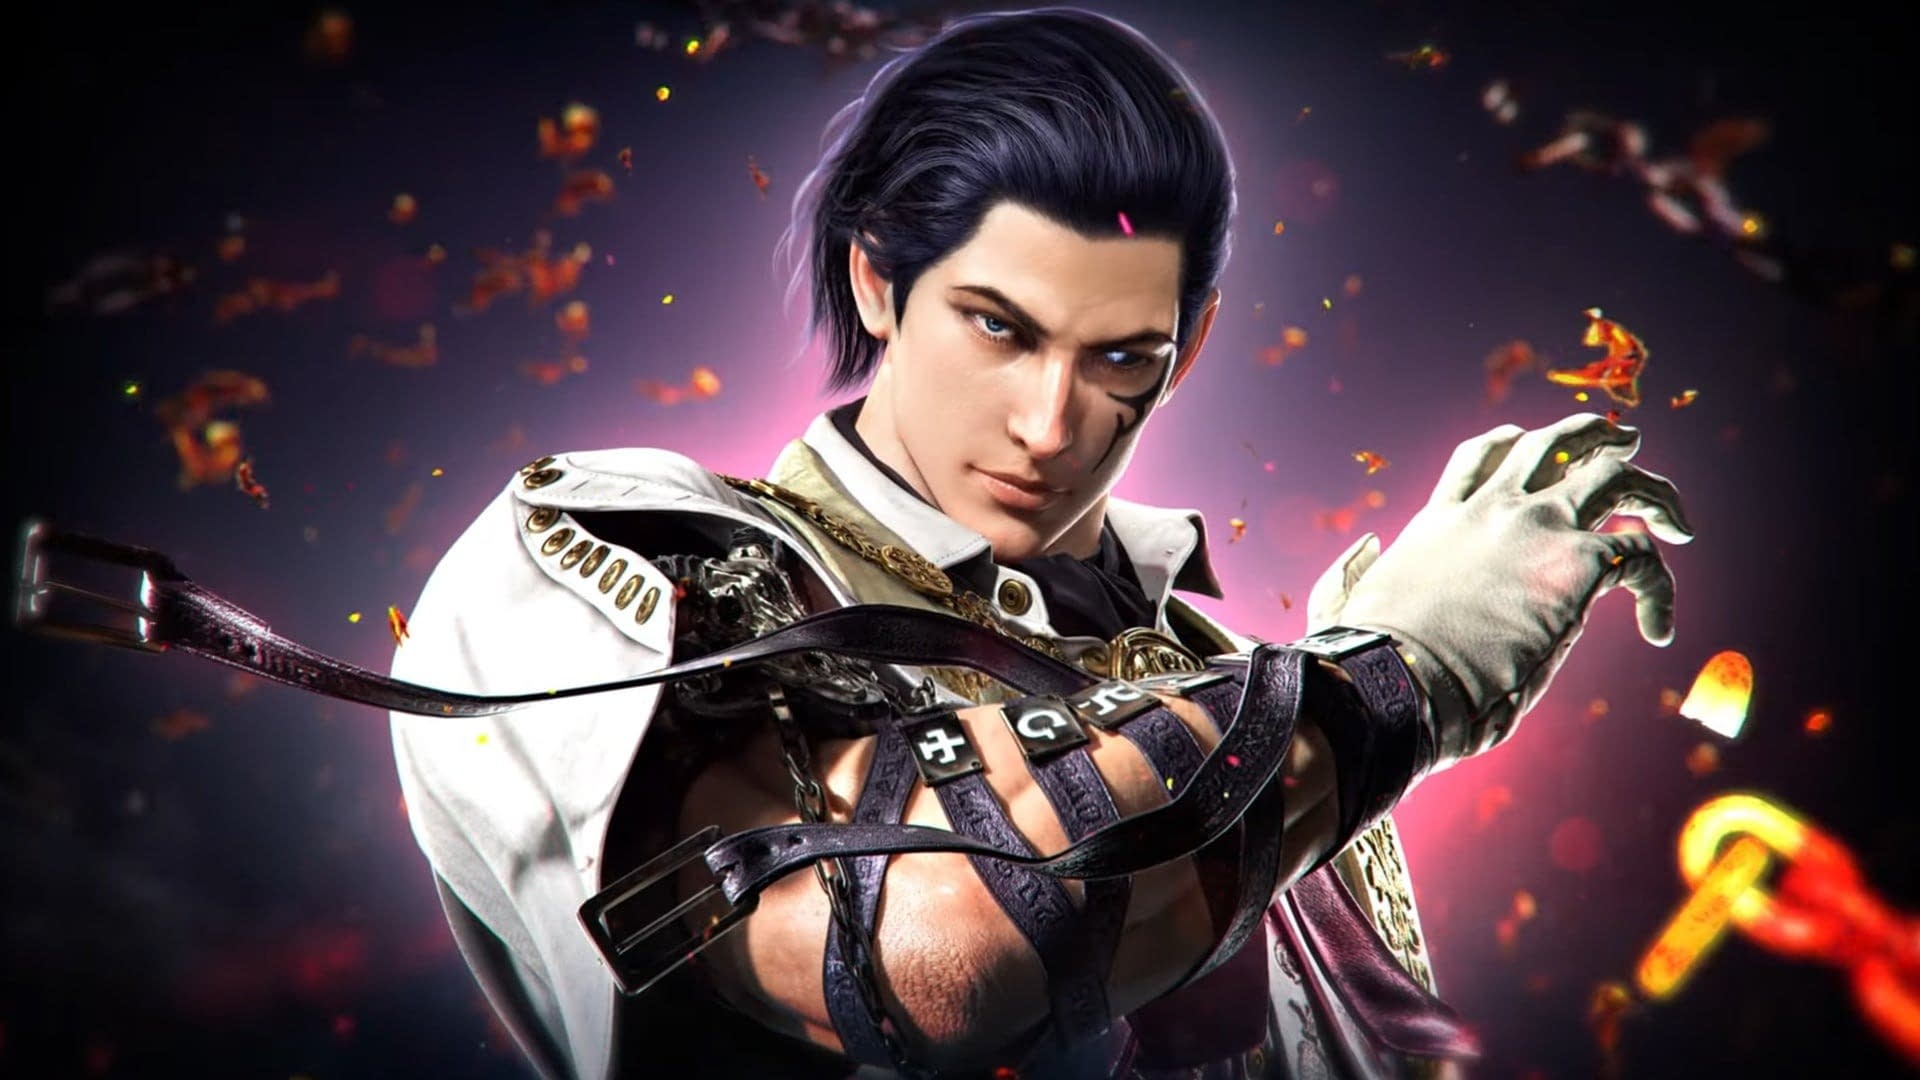 Claudio Serafino Character for Tekken 8 Published Play Video